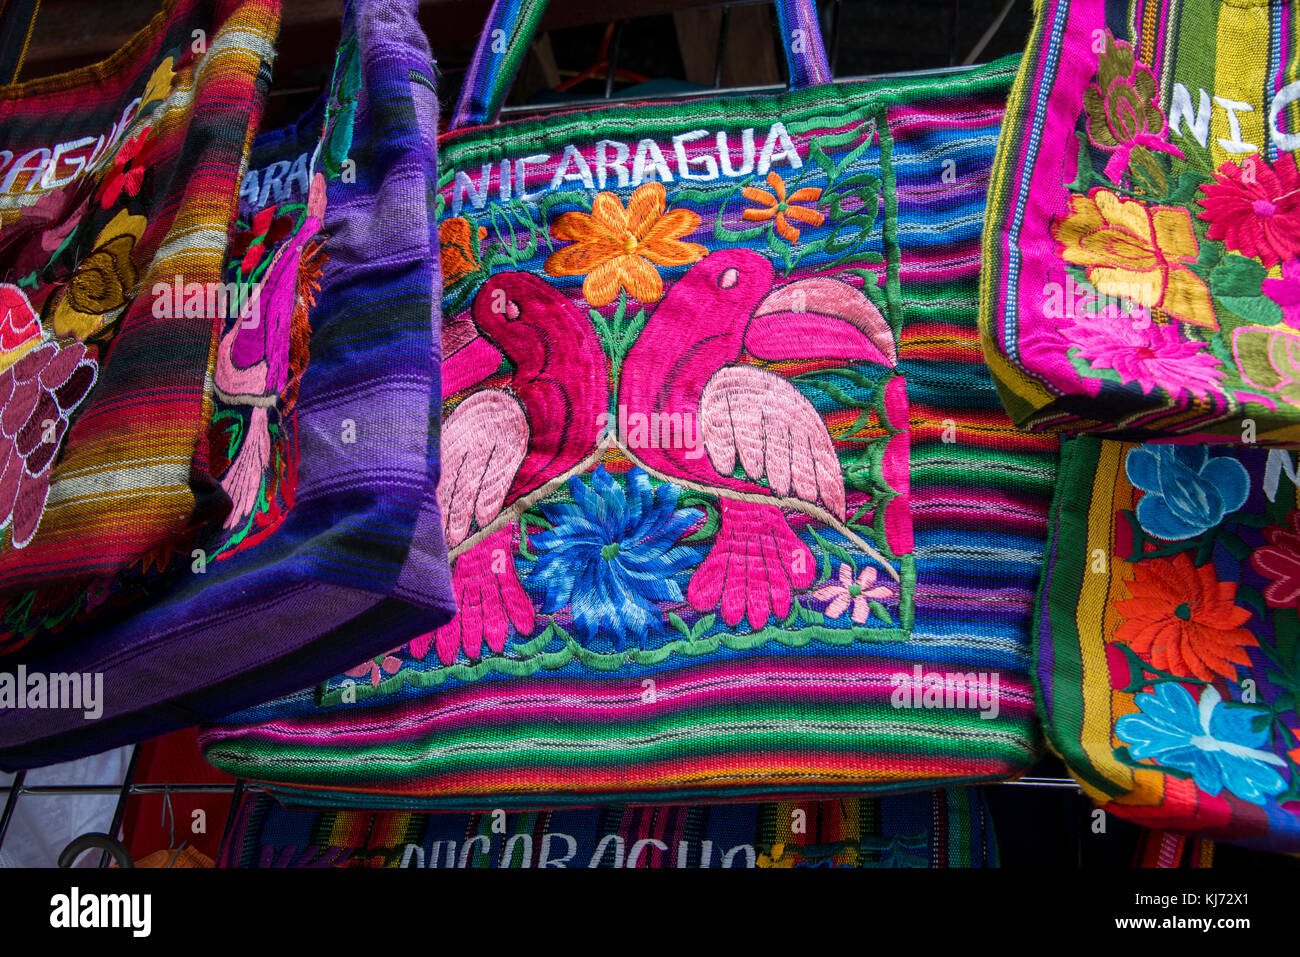 Central America, Nicaragua, Department of Masaya, town of Catarina. Typical embroidery handicraft souvenir bag. Stock Photo